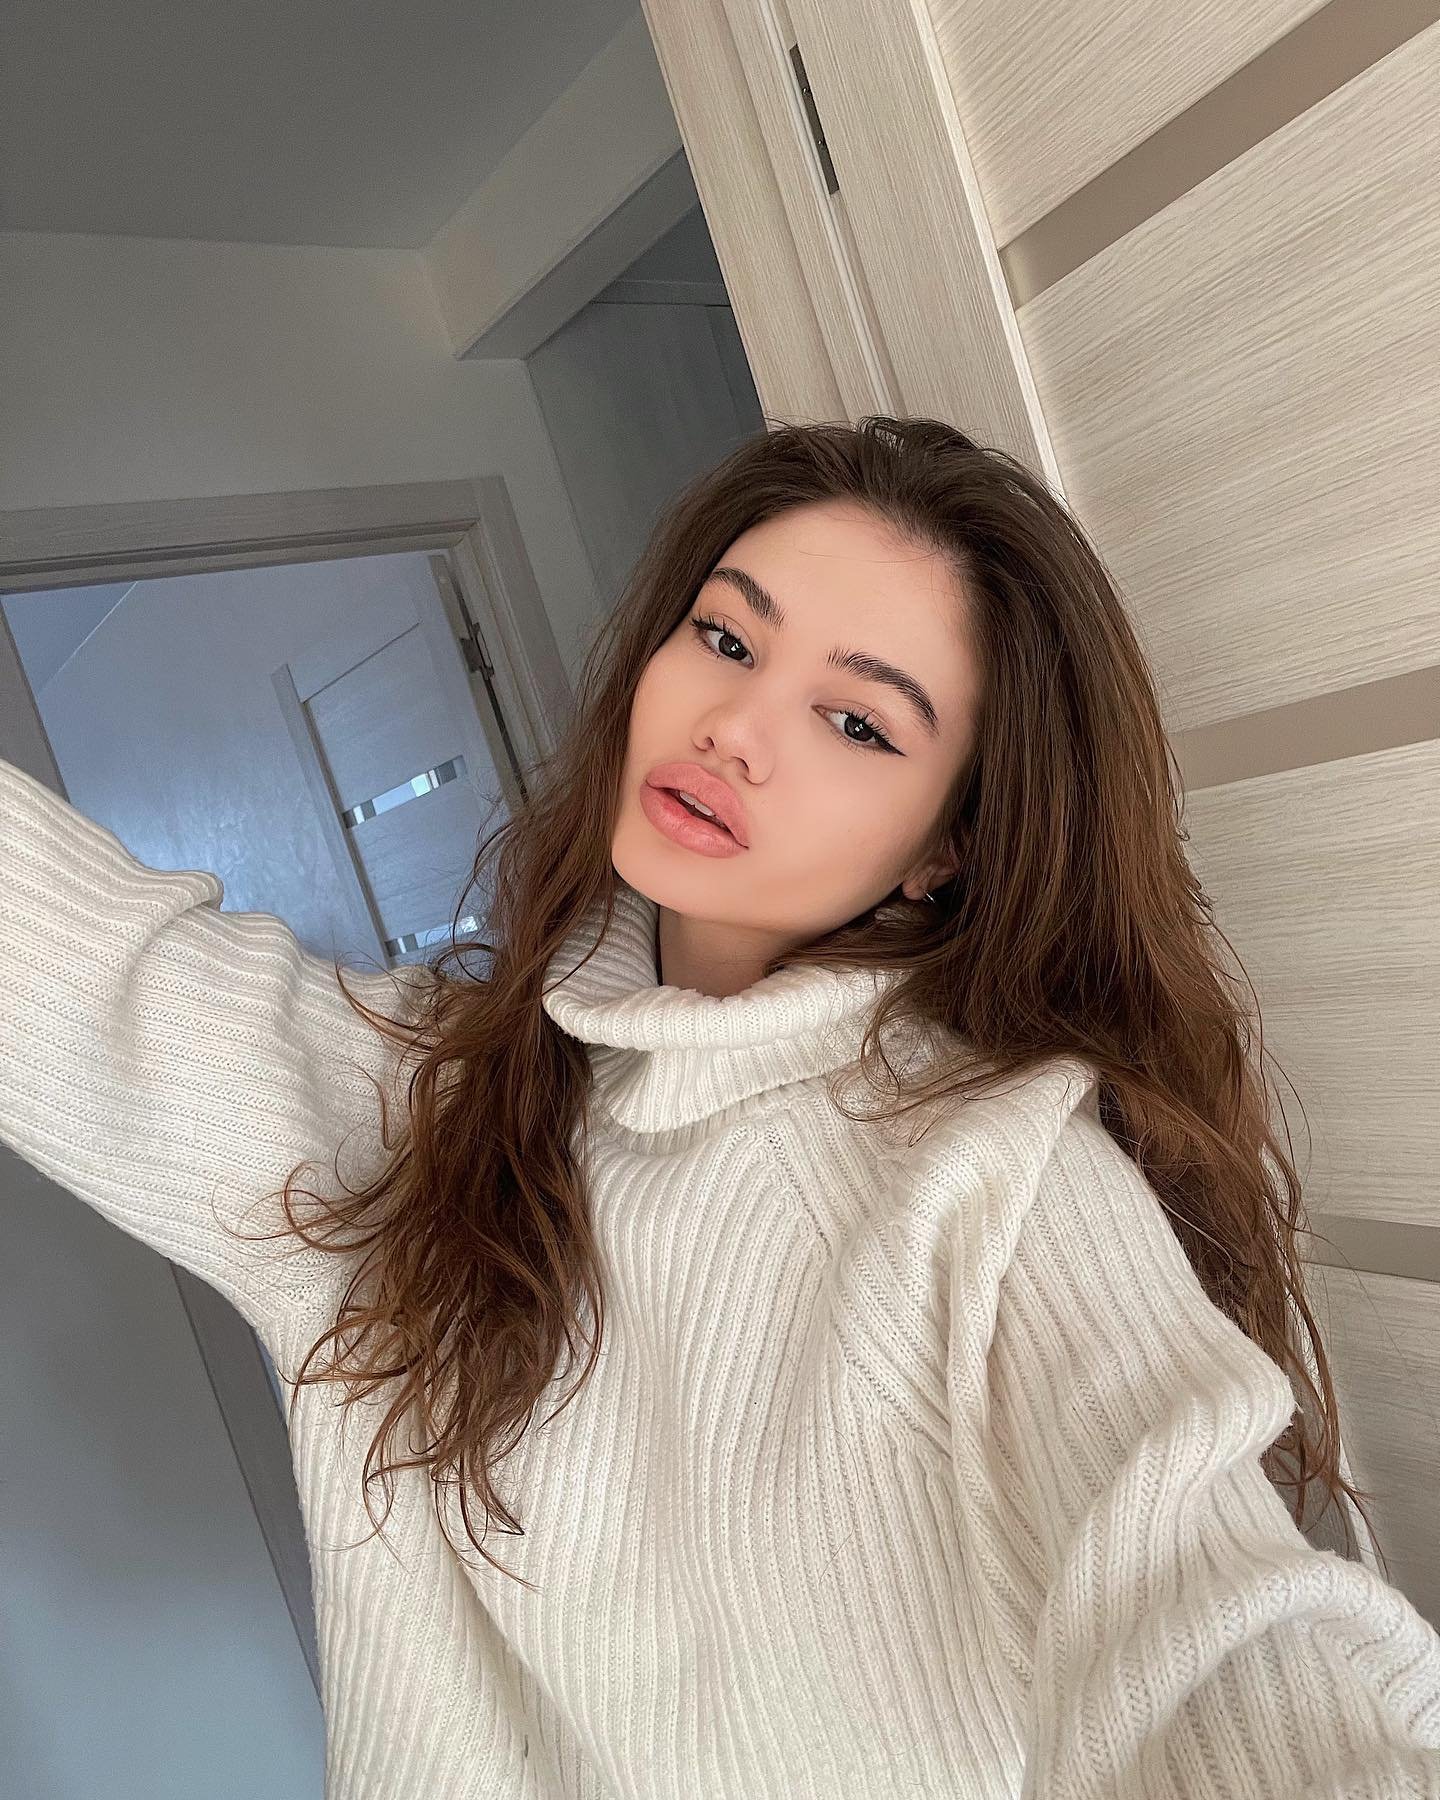 Looking for a serious man. Find me here - https://t.co/IuJaOvLWiP ❤❤❤